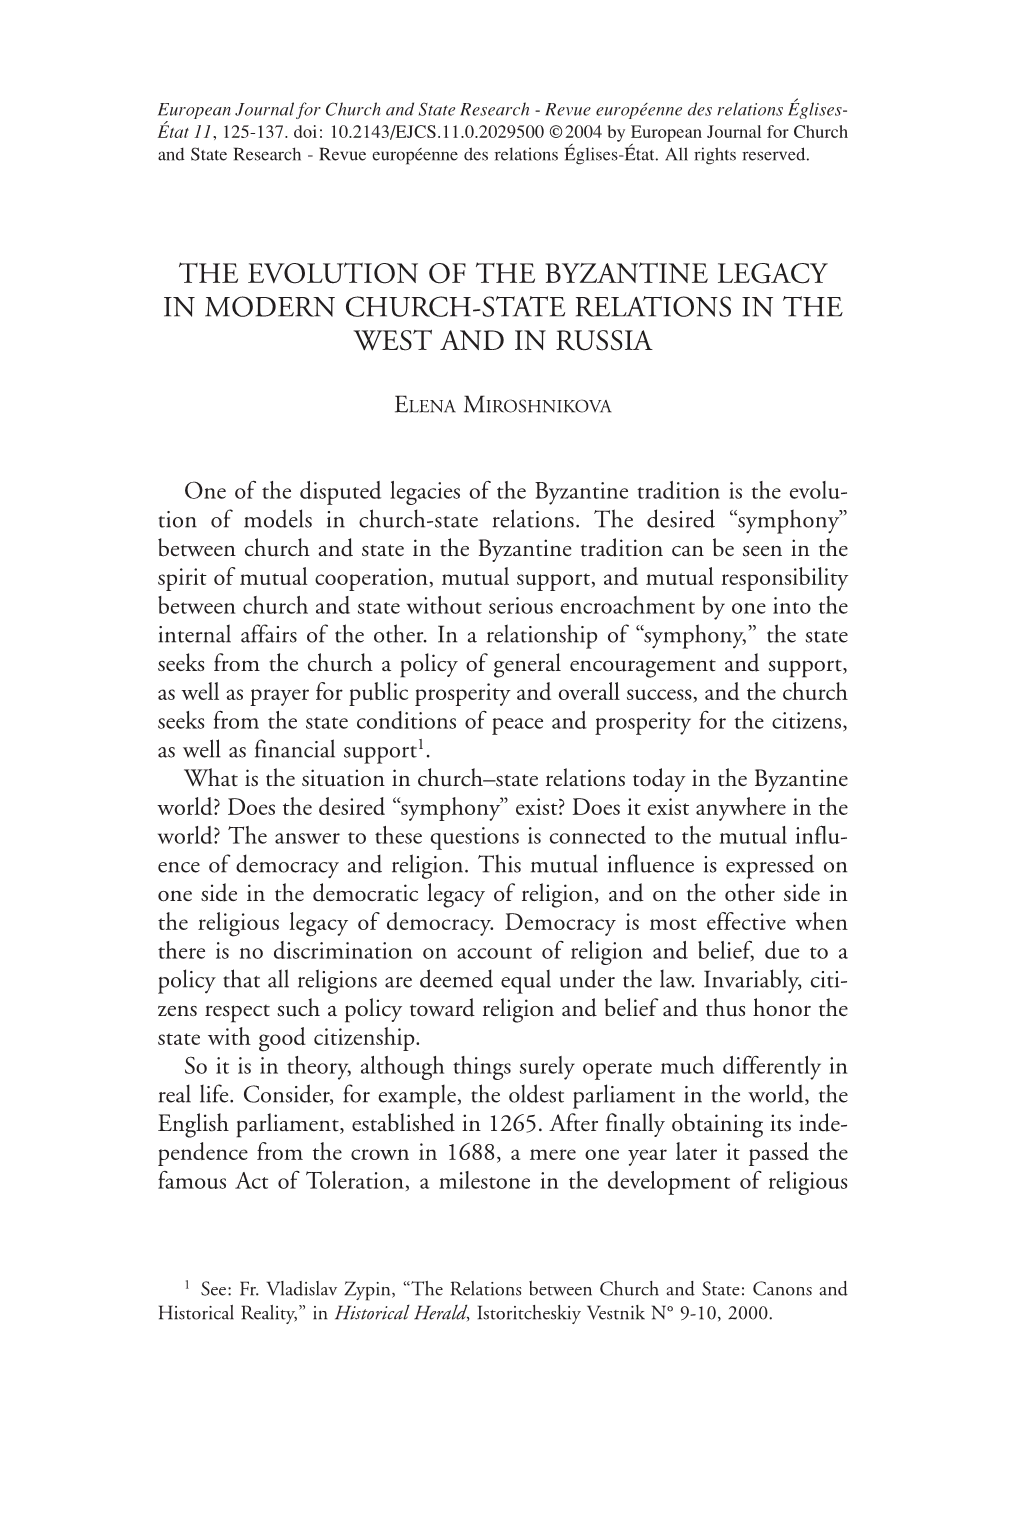 The Evolution of the Byzantine Legacy in Modern Church-State Relations in the West and in Russia